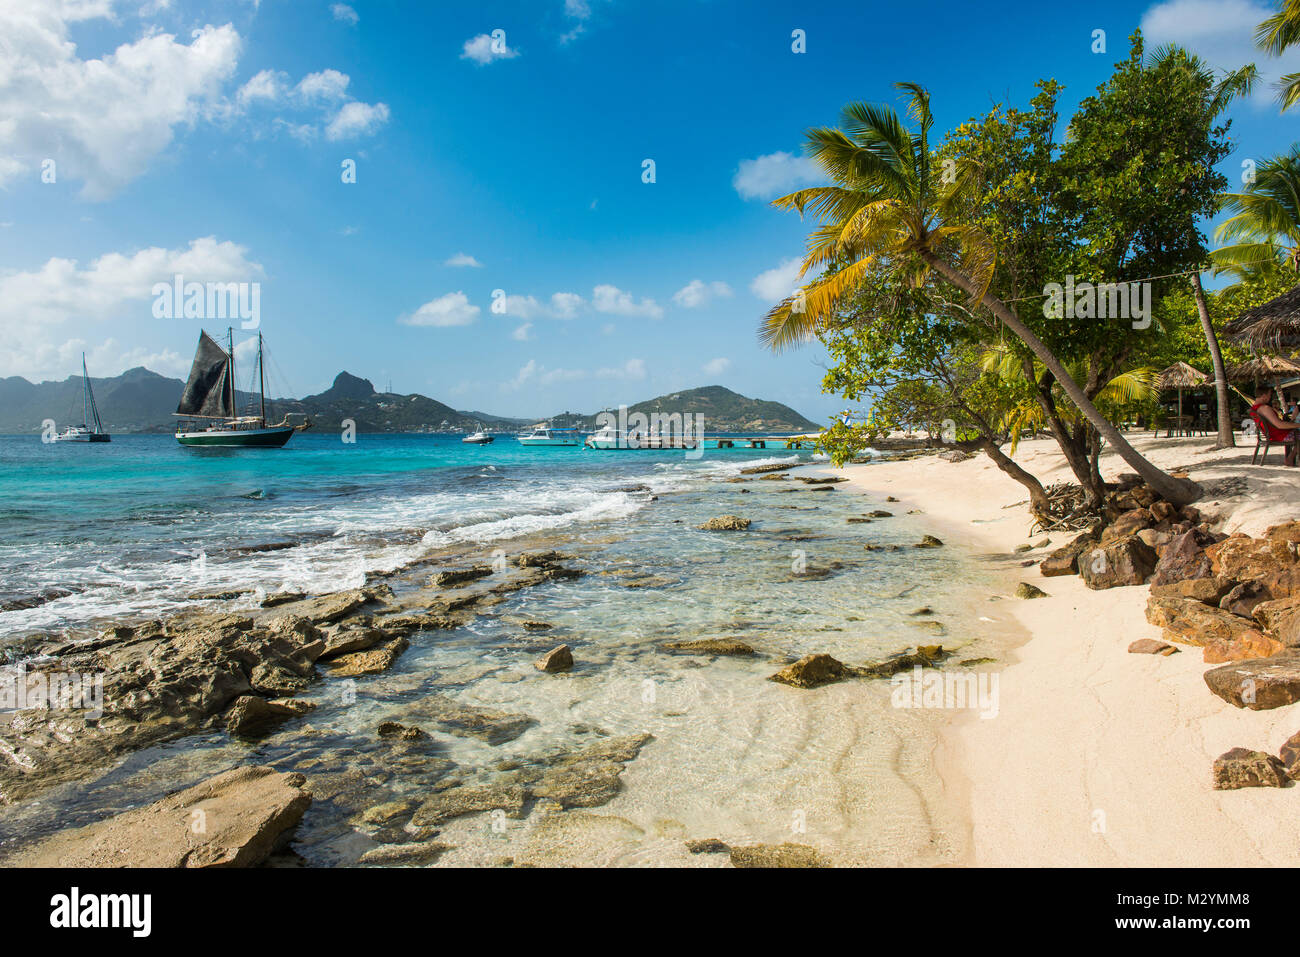 Rocky sandy beach on Palm island, Grenadines islands, St. Vincent and the Grenadines, Caribbean Stock Photo